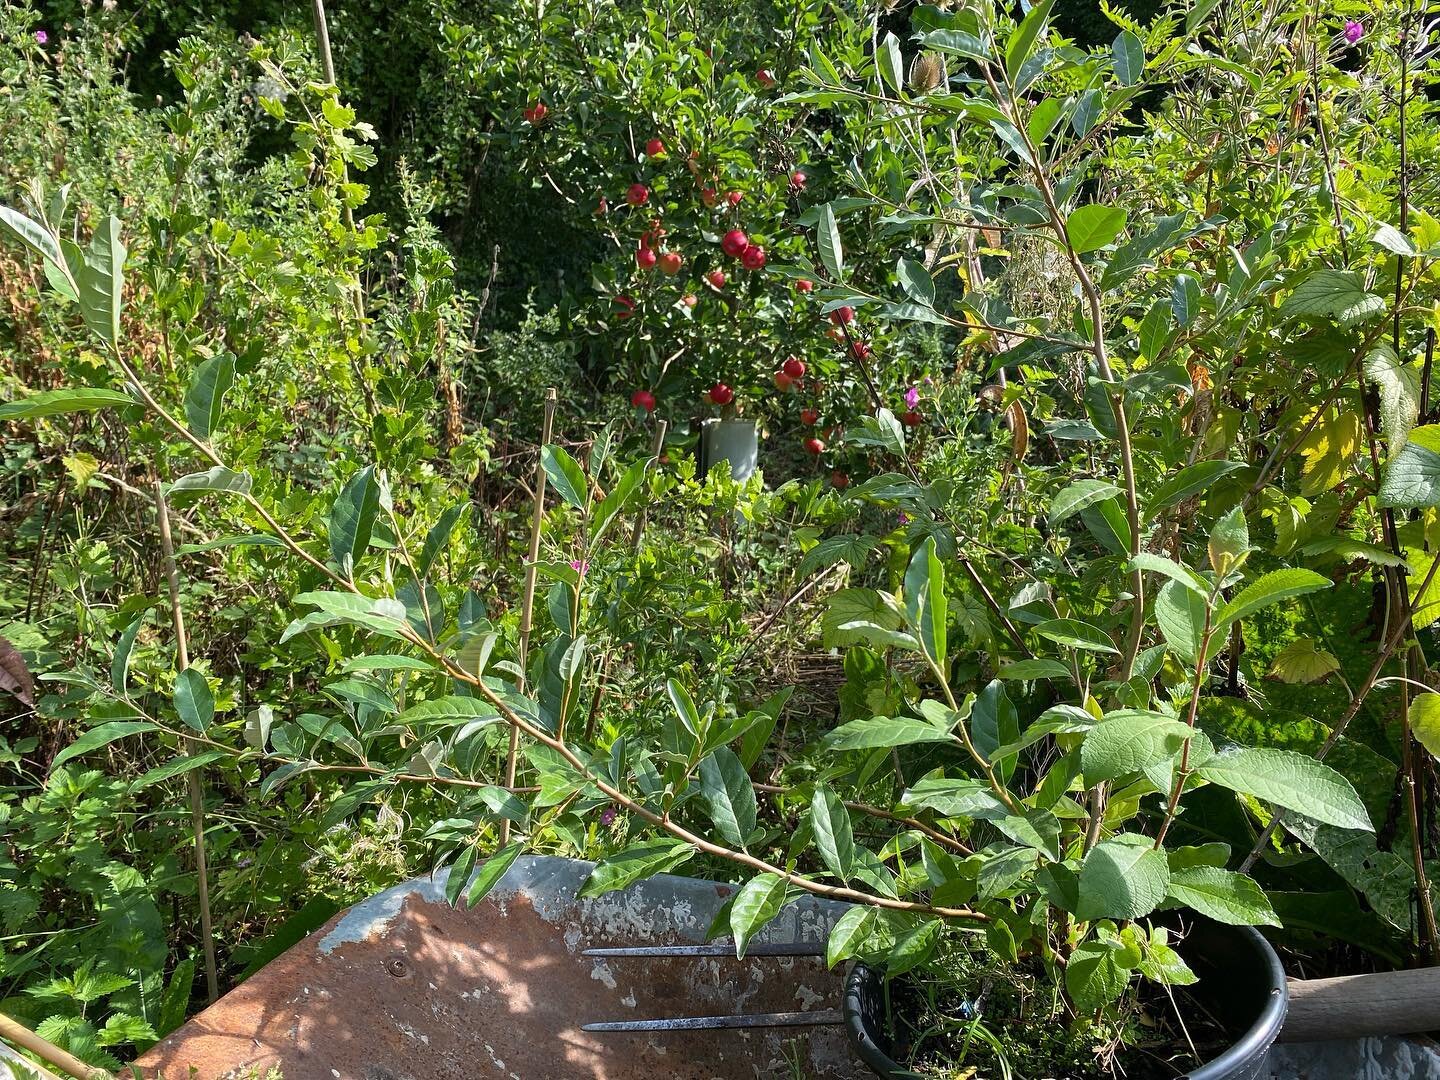 I have been growing these Autumn Olive (Eleaegnus umbellata)shrubs from cuttings and planting around my apple trees.

Recommended by Martin Crawford in his excellent books on forest gardening they are an amazing nitrogen fixer as well as producing ea